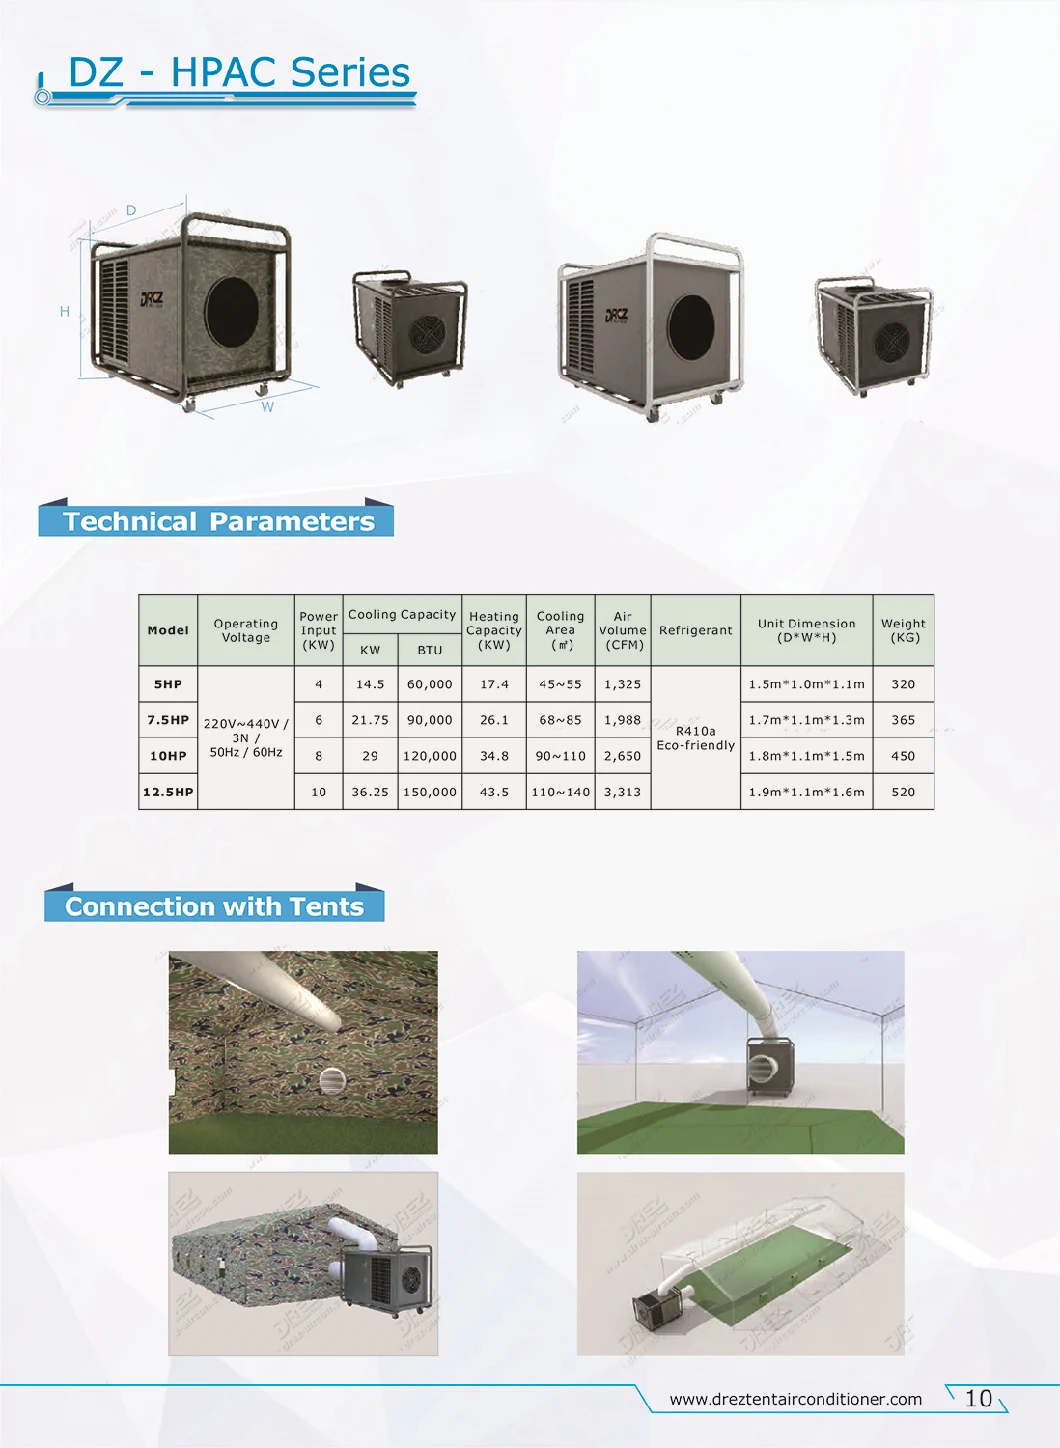 10HP Ducted Air-Cooled Portable Event AC Units for Wedding Tents